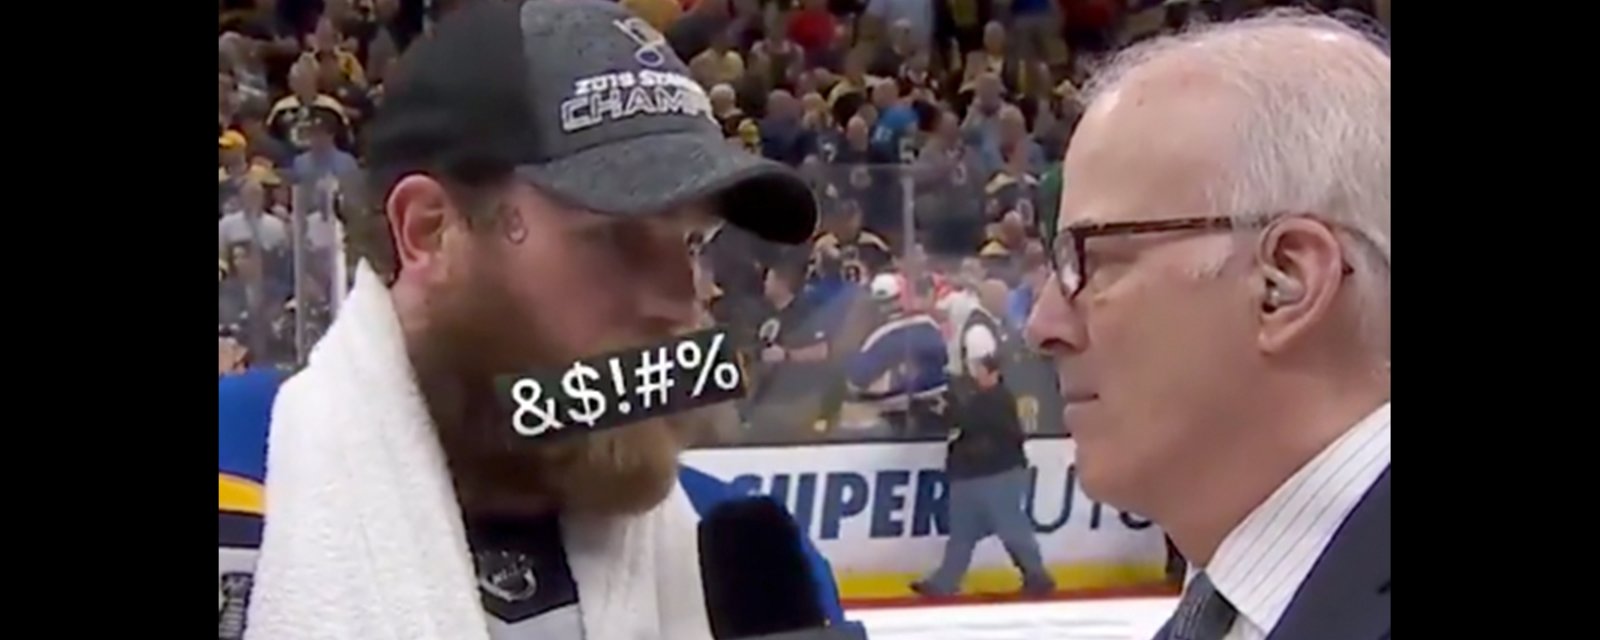 O’Reilly drops an F-bomb on live TV following Game 7 win